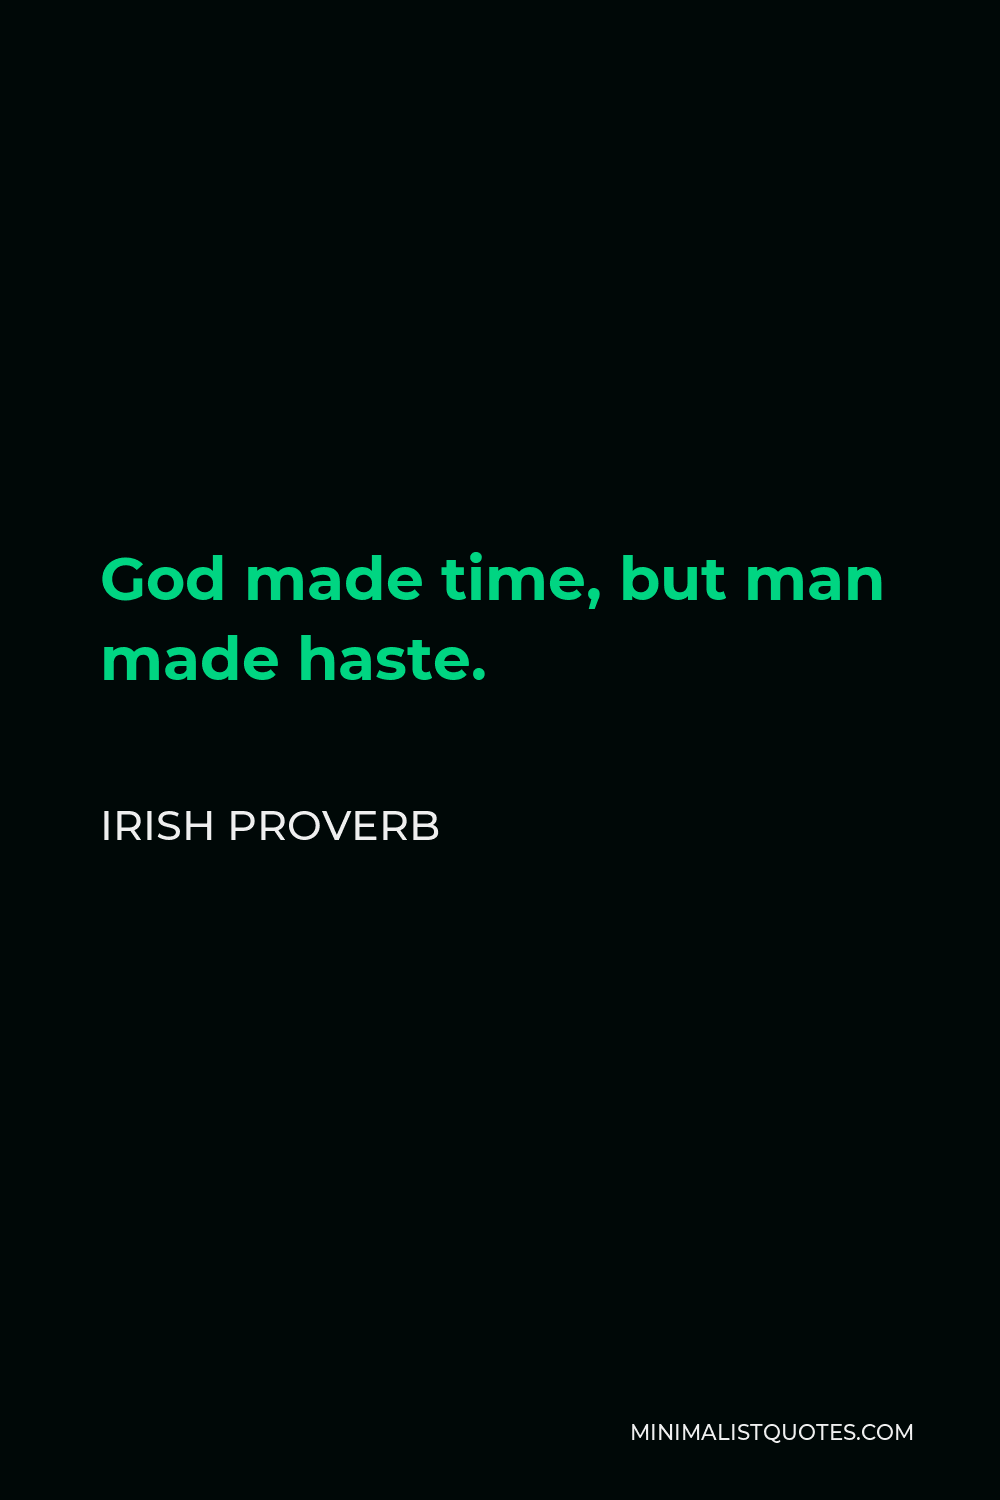 Irish Proverb Quote - God made time, but man made haste.